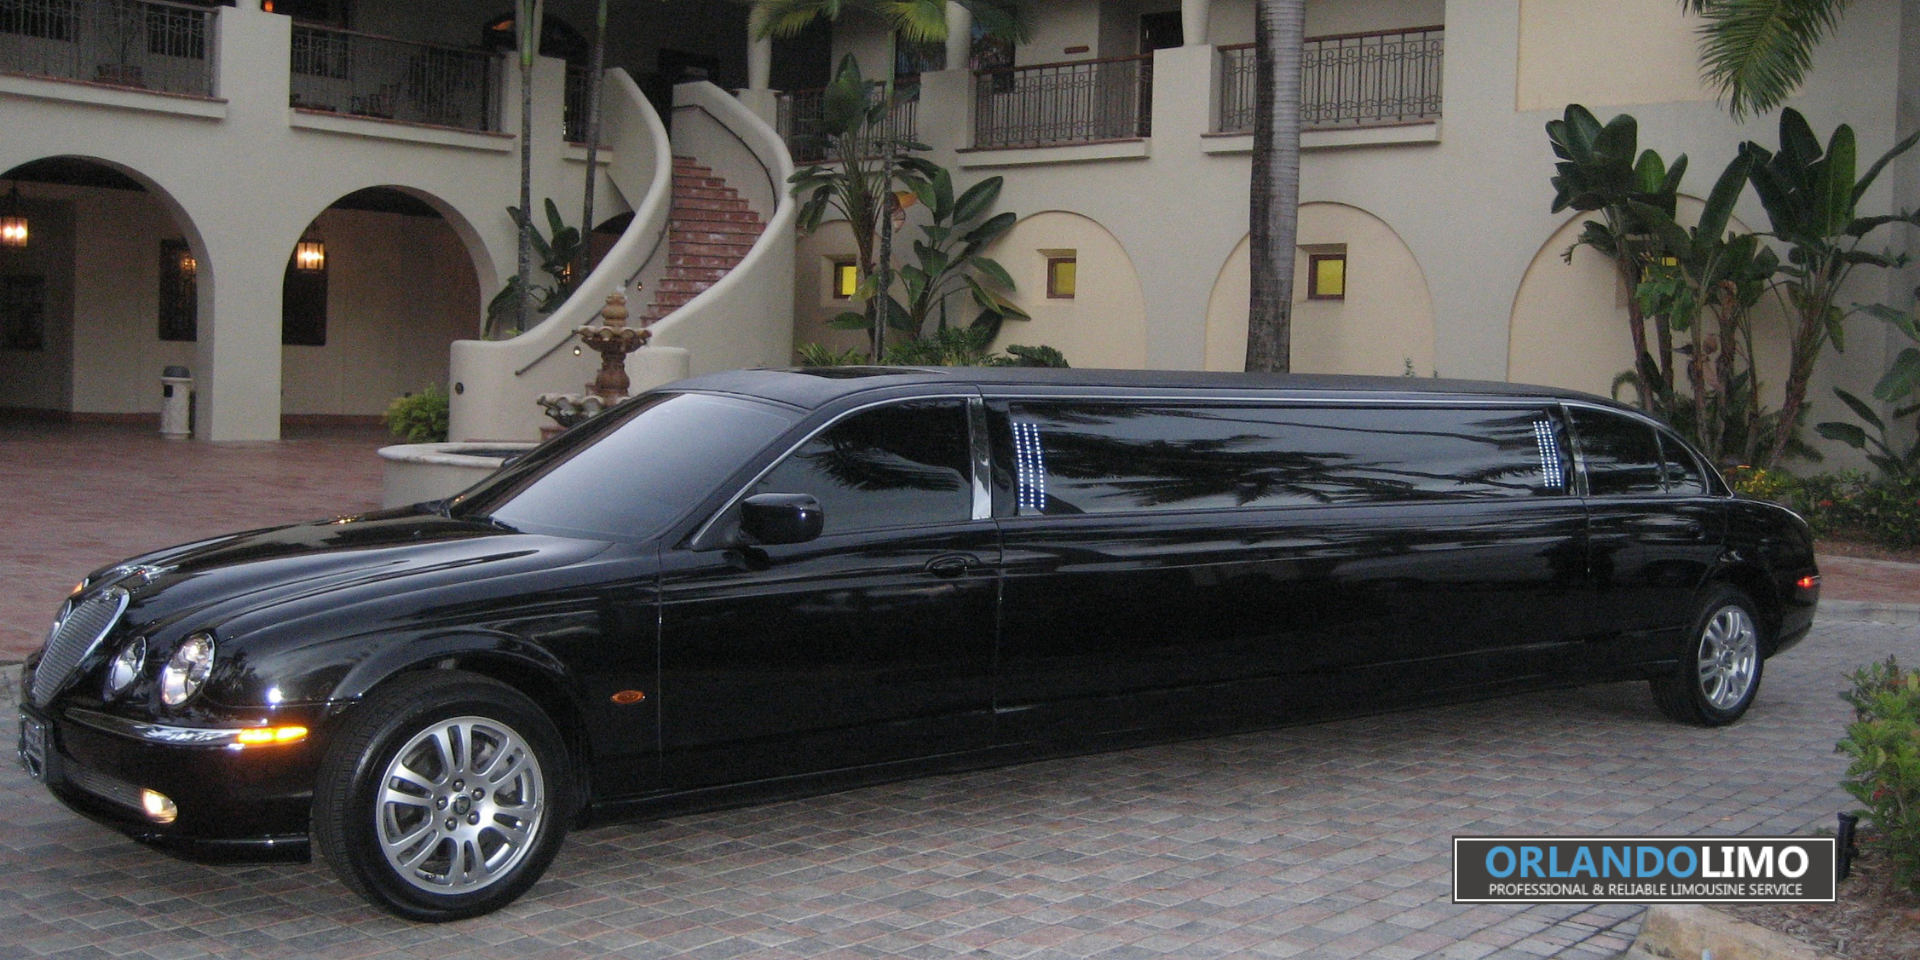 WHY ORLANDO LIMO SERVICE IS THE BEST TO TRAVEL